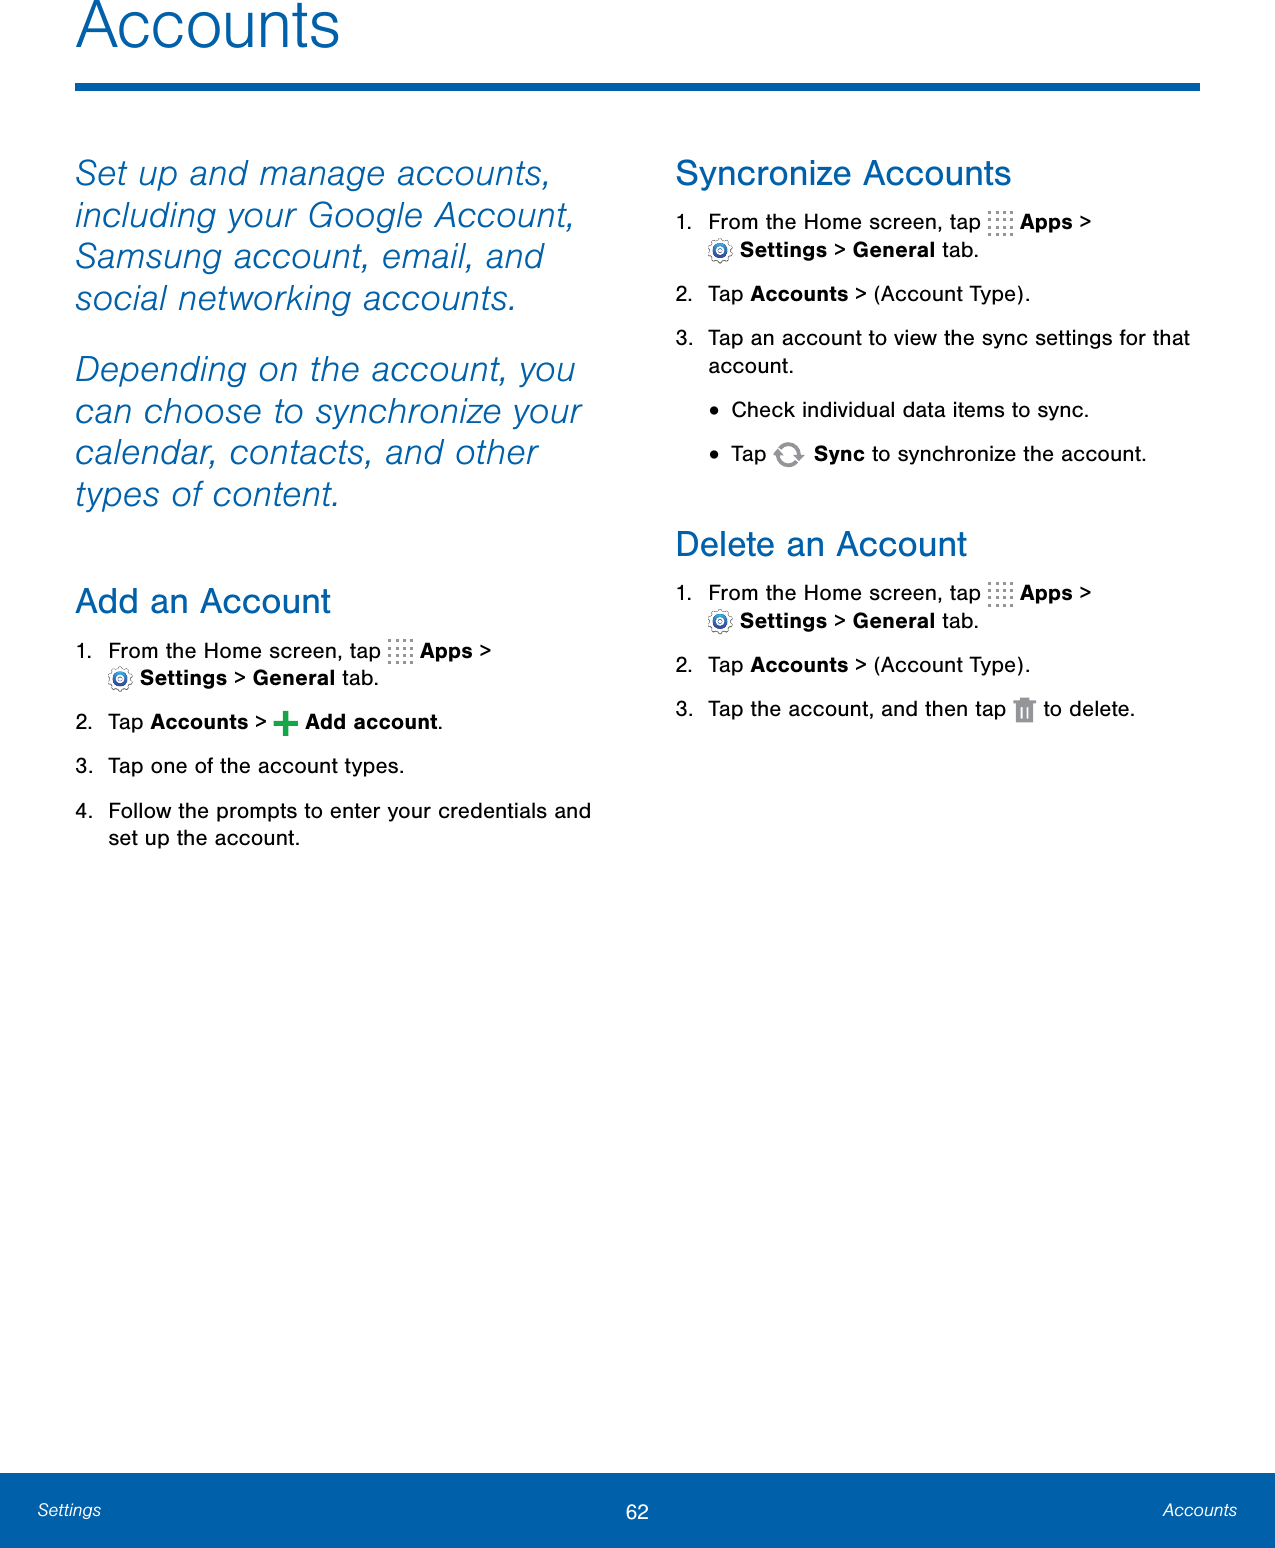 62 AccountsSettingsSet up and manage accounts, including your Google Account, Samsung account, email, and social networking accounts.Depending on the account, you can choose to synchronize your calendar, contacts, and other types of content.Add an Account1. From the Home screen, tap   Apps &gt;Settings &gt; Generaltab.2. Tap Accounts &gt;   Add account.3. Tap one of the account types.4. Follow the prompts to enter your credentials andset up the account.Syncronize Accounts1. From the Home screen, tap   Apps &gt;Settings &gt; Generaltab.2. Tap Accounts &gt; (Account Type).3. Tap an account to view the sync settings for thataccount.•Check individual data items to sync.•Tap  Sync to synchronize the account.Delete an Account1. From the Home screen, tap   Apps &gt;Settings &gt; Generaltab.2. Tap Accounts &gt; (Account Type).3. Tap the account, and then tap   to delete.Accounts